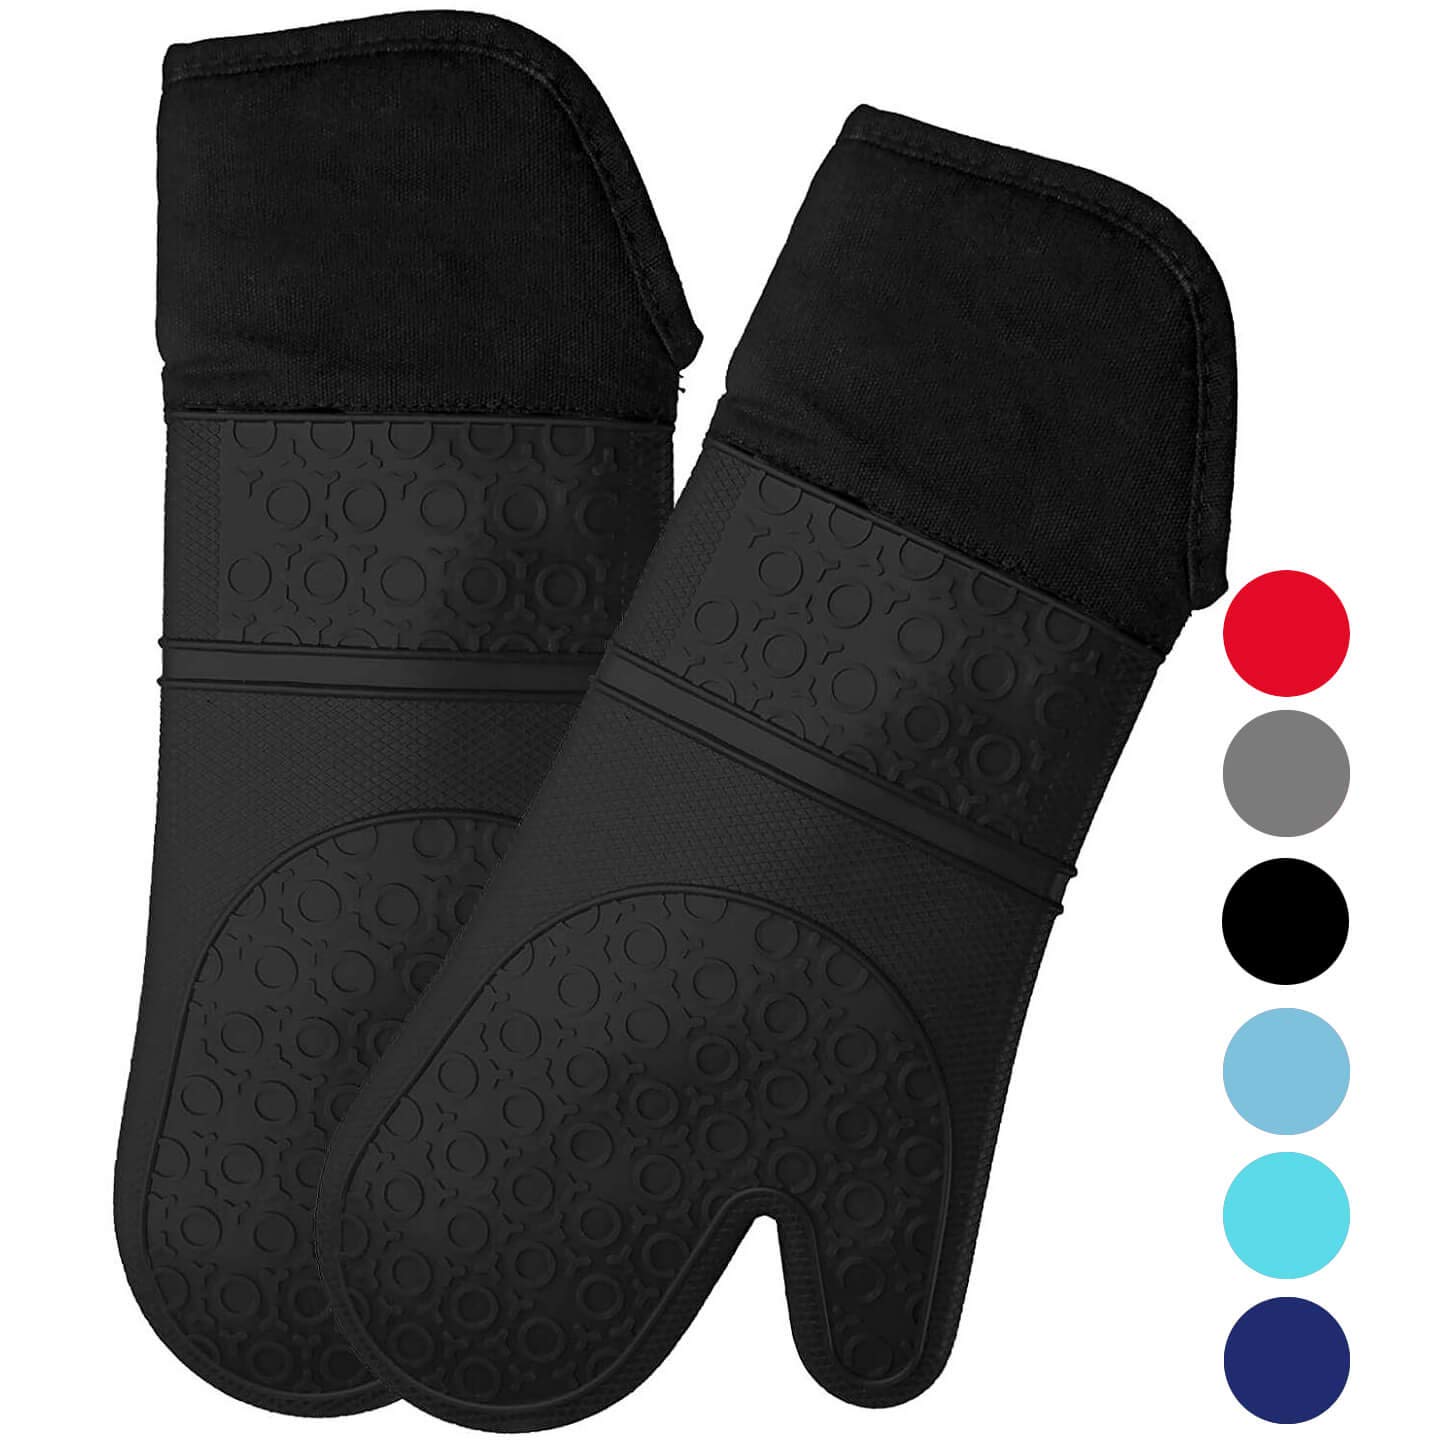 Silicone Oven Mitts with Quilted Cotton Lining - Professional Heat Resistant Kitchen Pot Holders - 1 Pair (Oven Mitts, Black - Extra long)